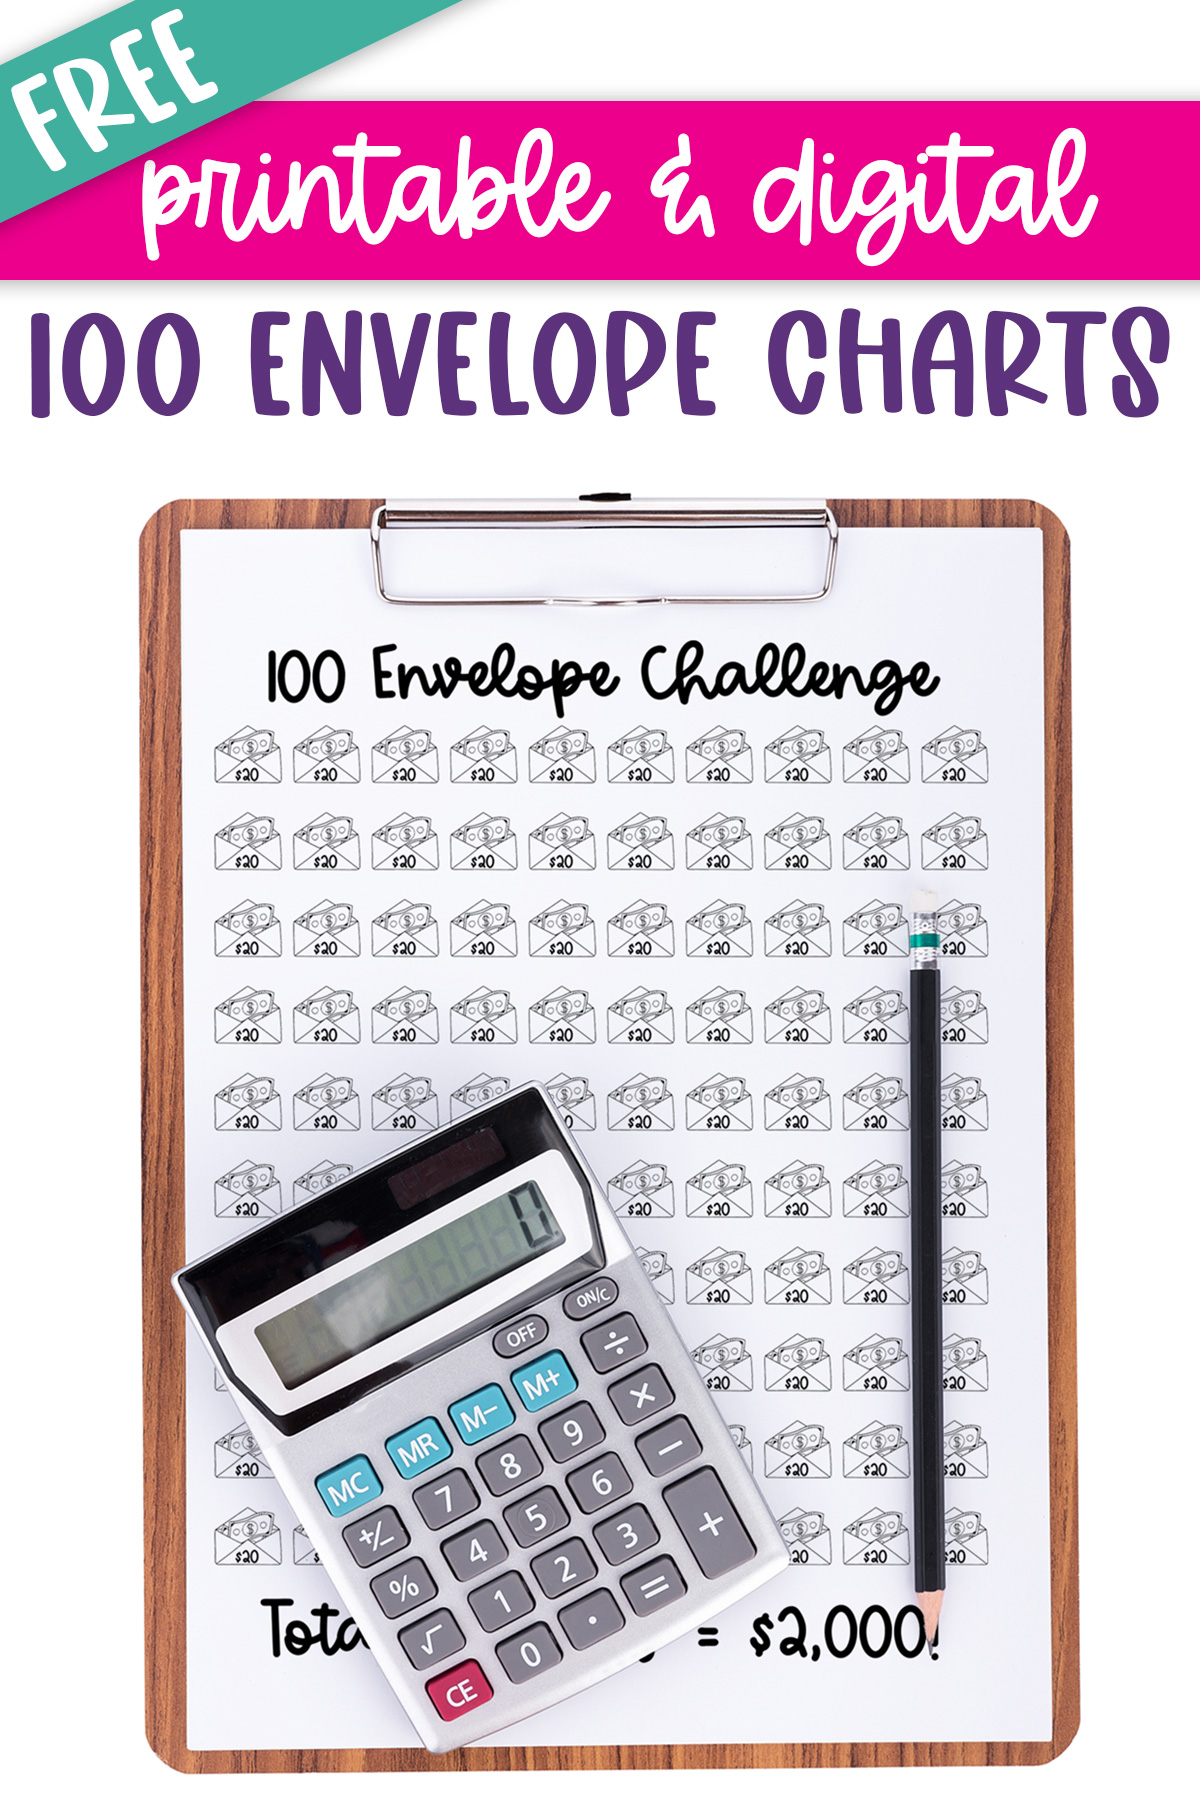 At the top it says free printable & digital 100 envelope charts. Below, is an image is showing an example of a free 100 envelope challenge chart printable you can get at the end of this post.